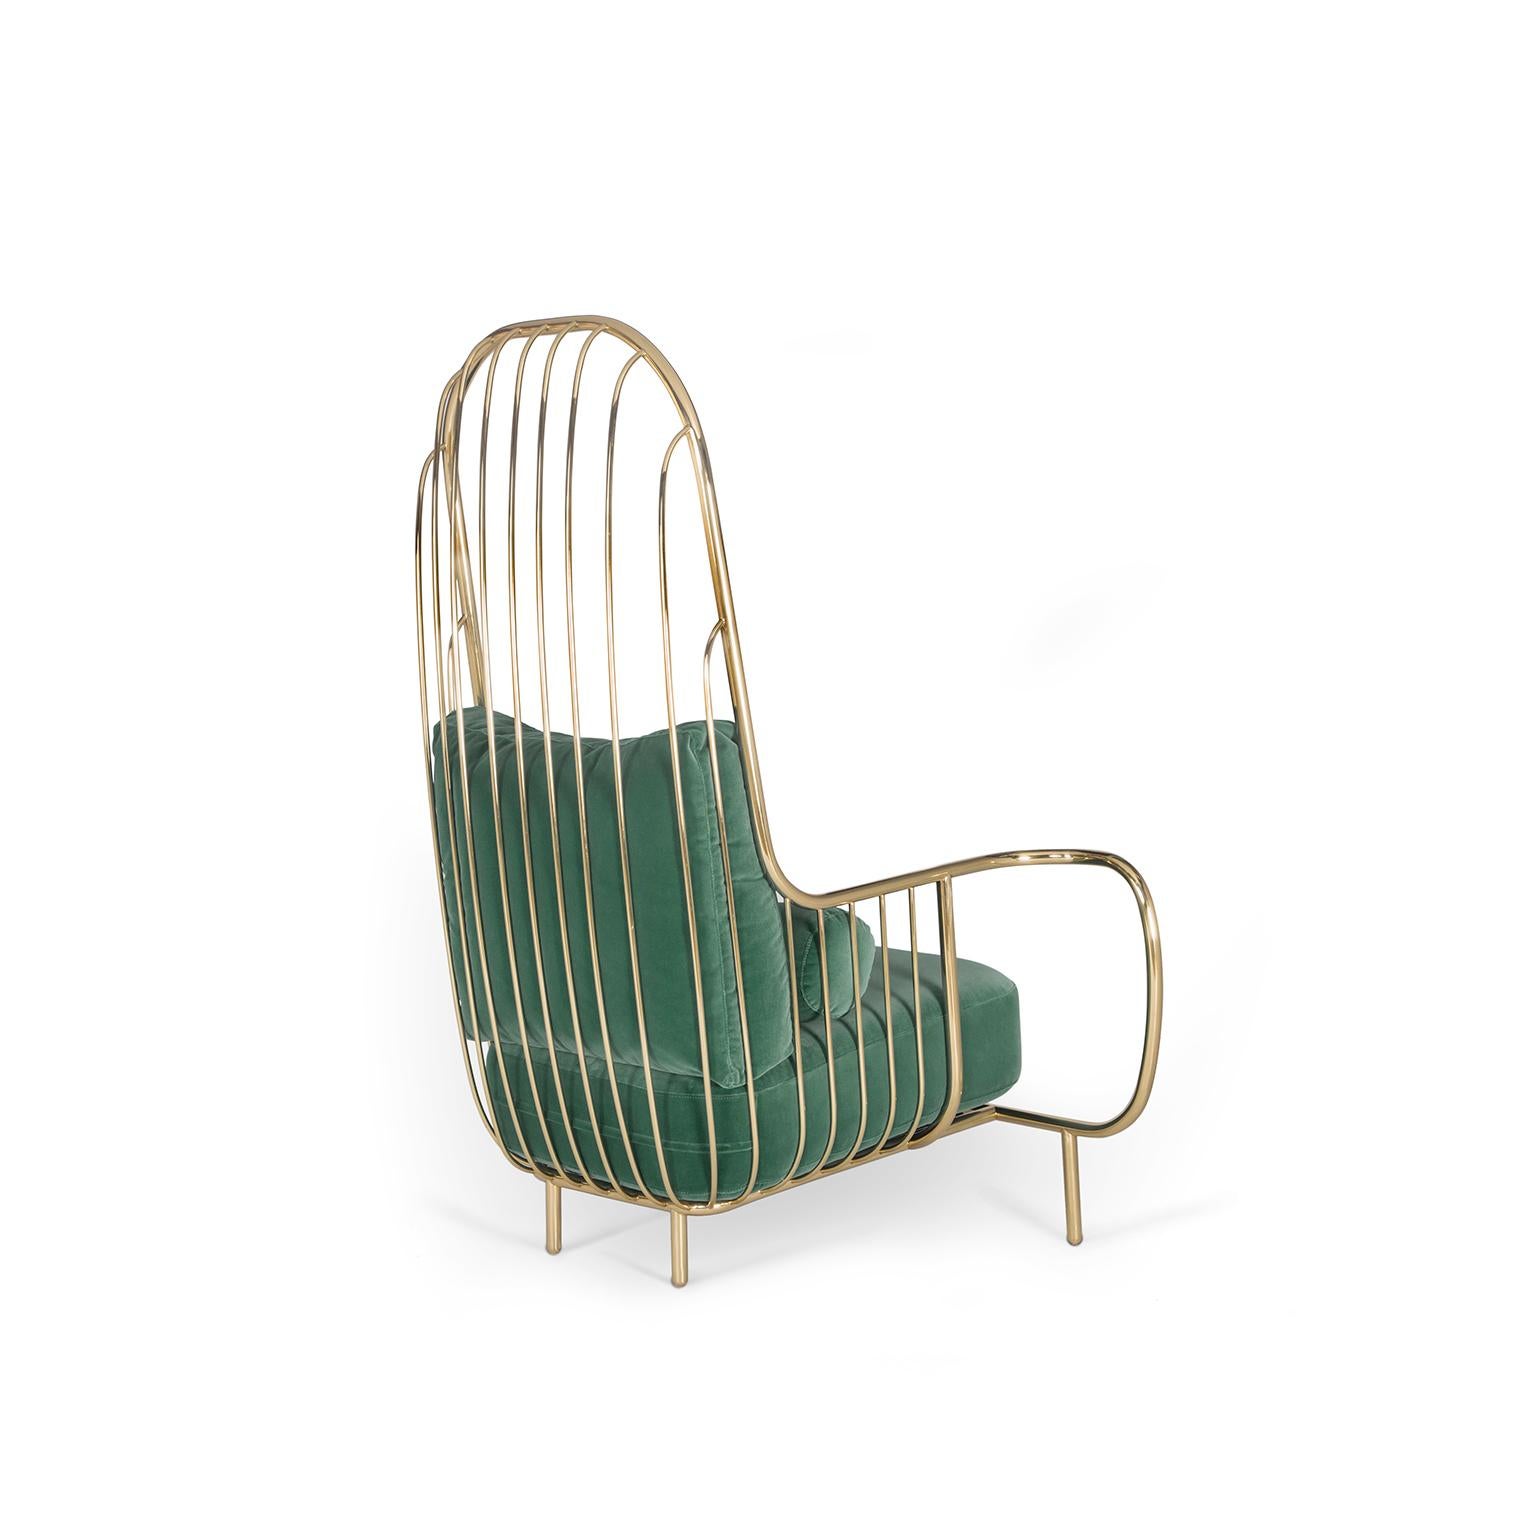 Inspiration: 
The sculptural forms of the 30s inspired the Liberty Collection. The tubular and steel structures that have marked those years are combined with a new inspiration that emphasizes the antagonistic feeling of deprivation of liberty. This